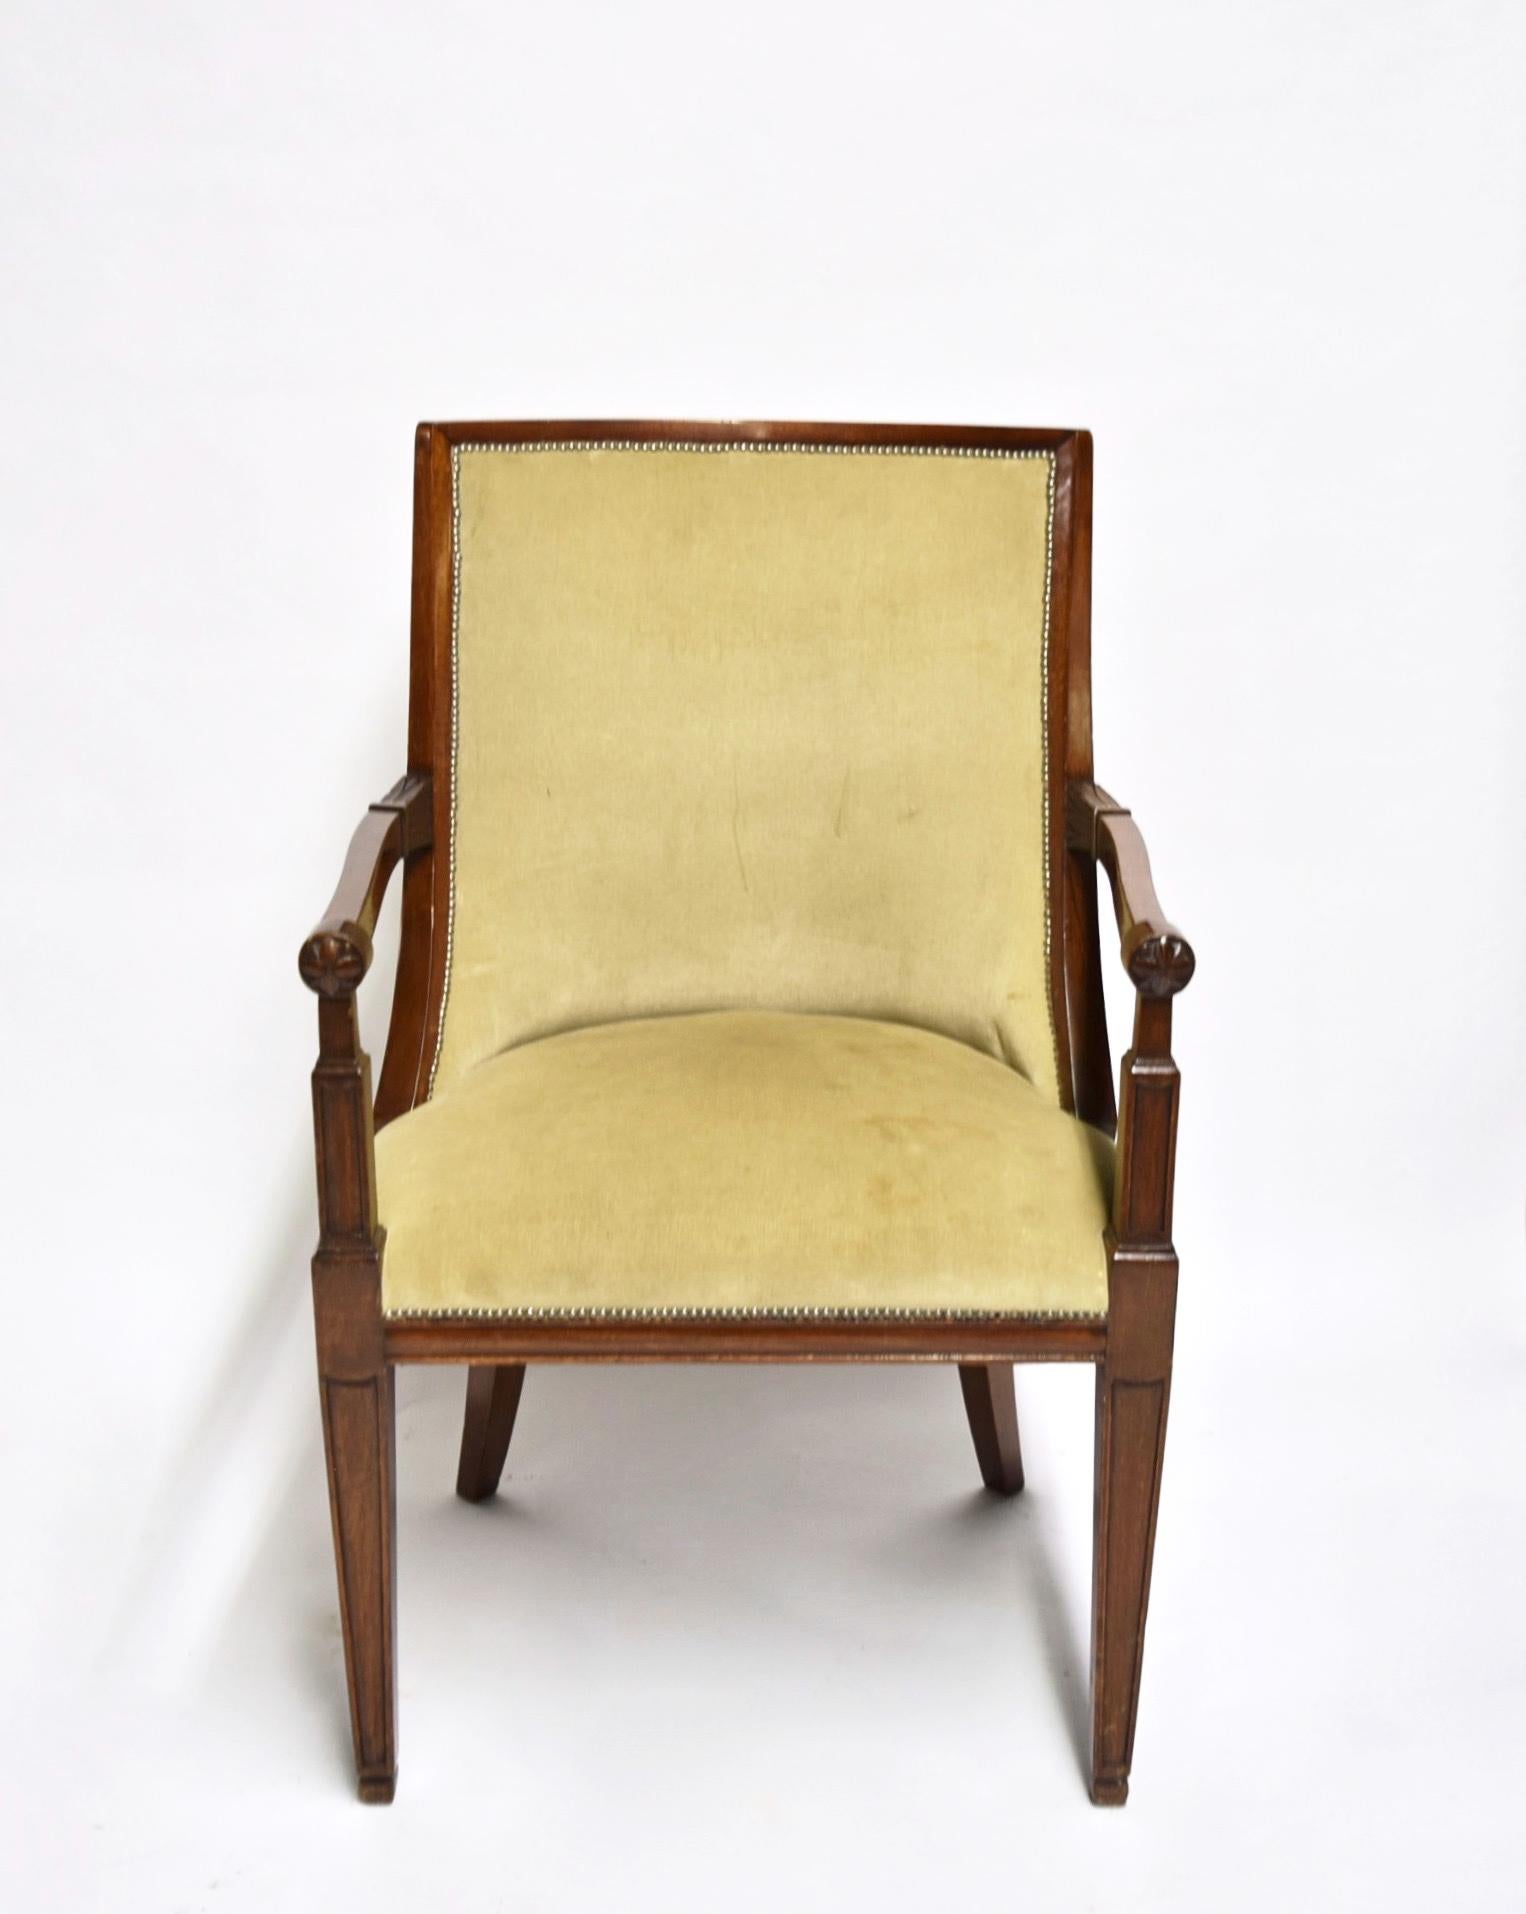 Pair of Mahogany Wood and Beige Mohair Velvet Armchairs, France Circa 1840 For Sale 2